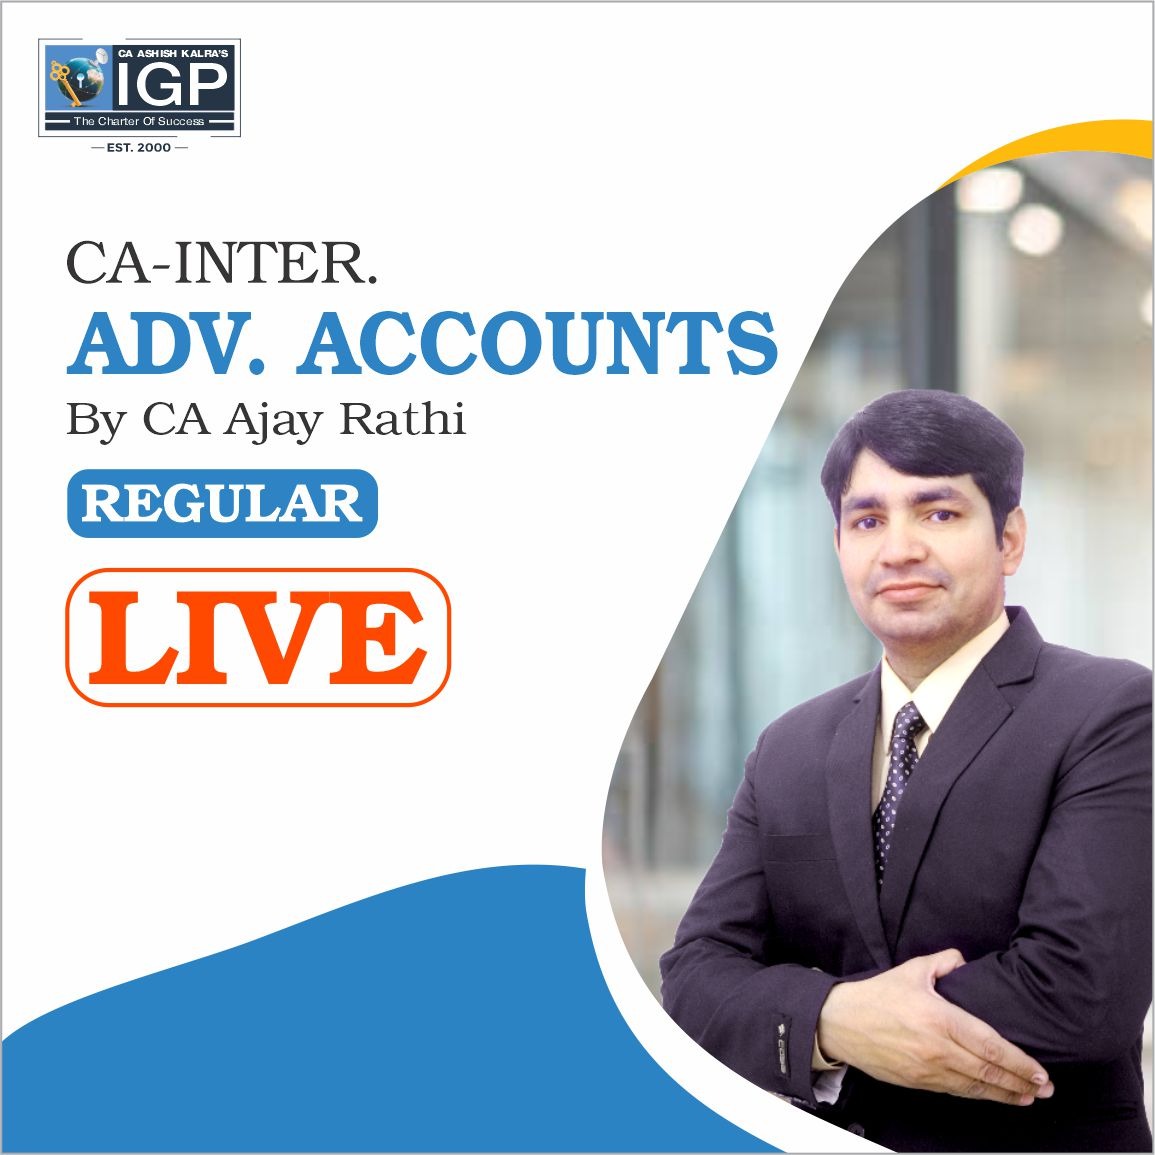 CA Inter Adv Account Face To Face/Live-CA-INTER-Adv. Account- Ca Ajay Rathi